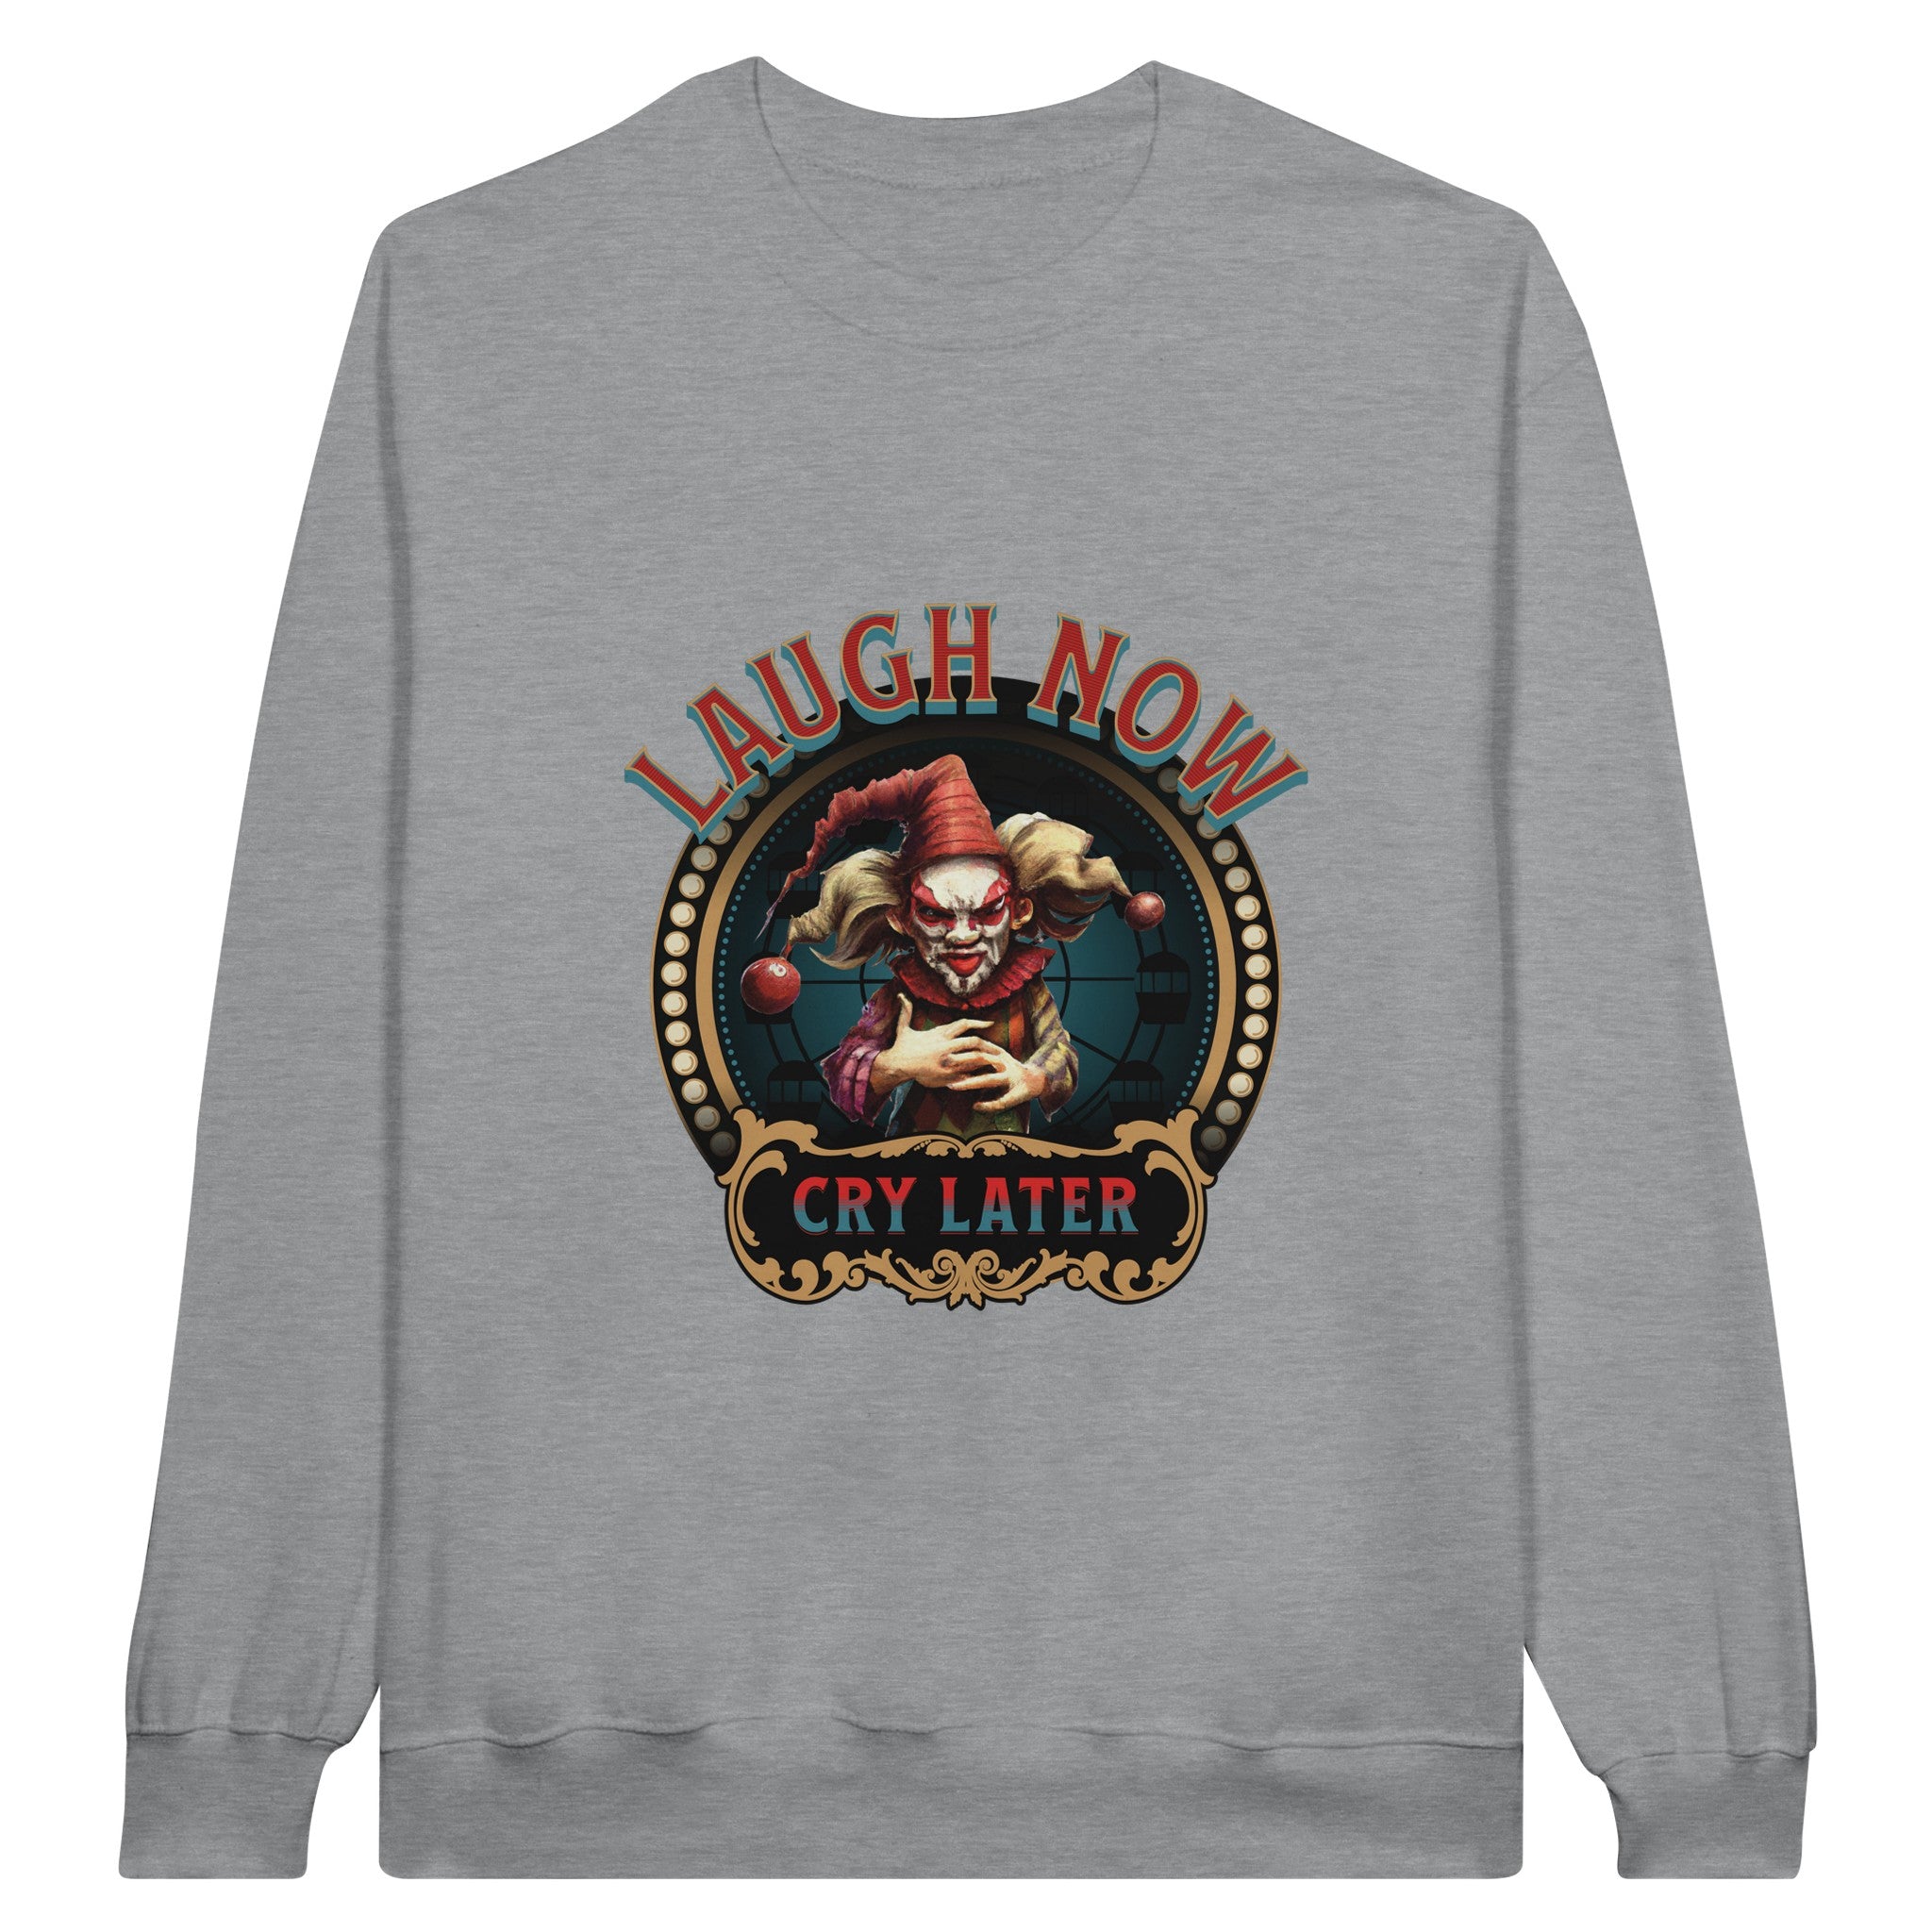 SORTYGO - Laugh Now Cry Later Men Sweatshirt in Sports Grey